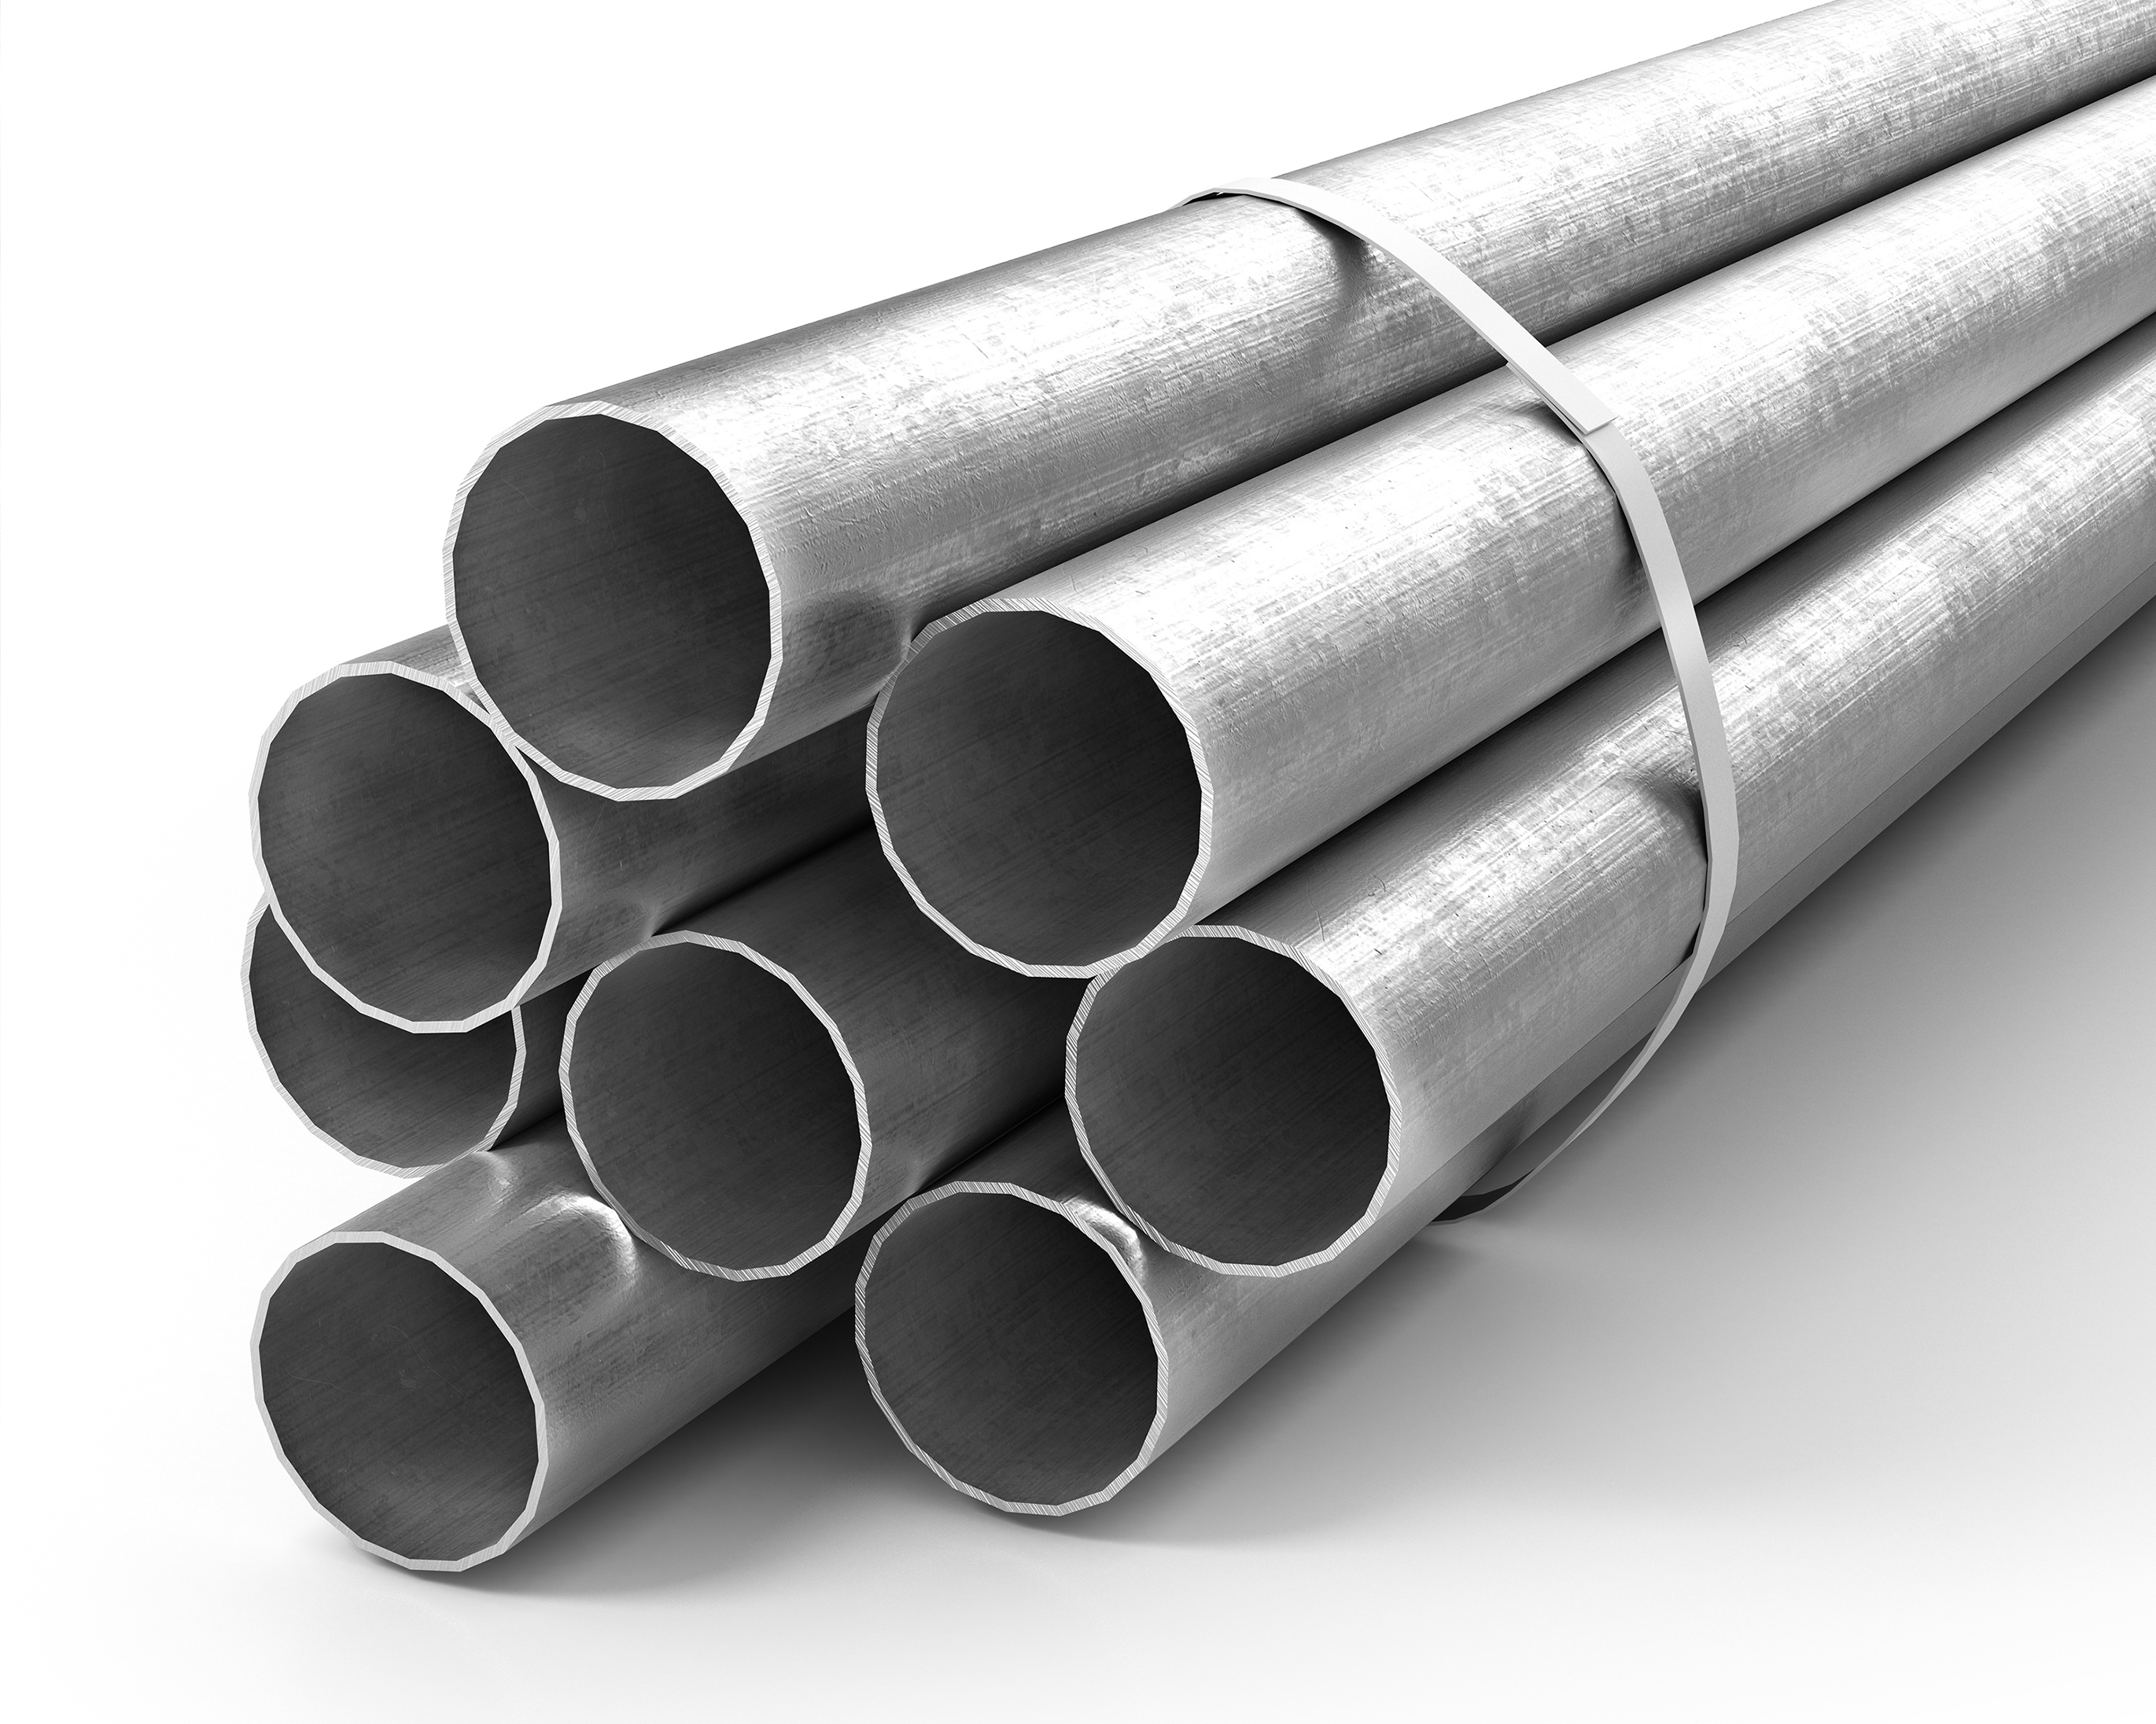 904L Stainless Steel pipe